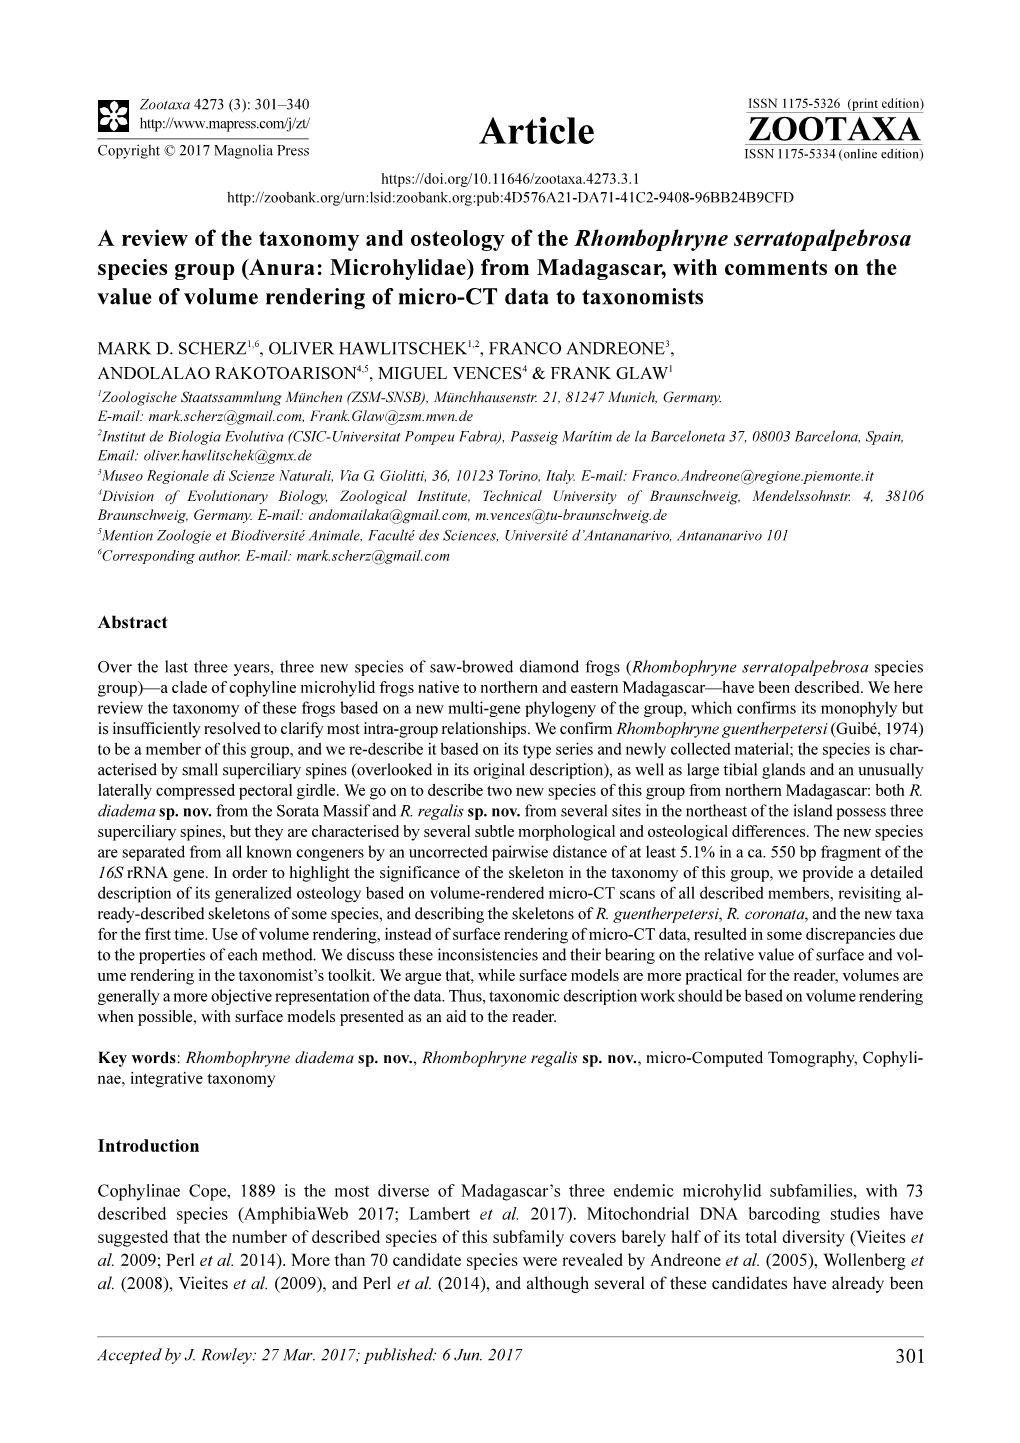 A Review of the Taxonomy and Osteology of the Rhombophryne